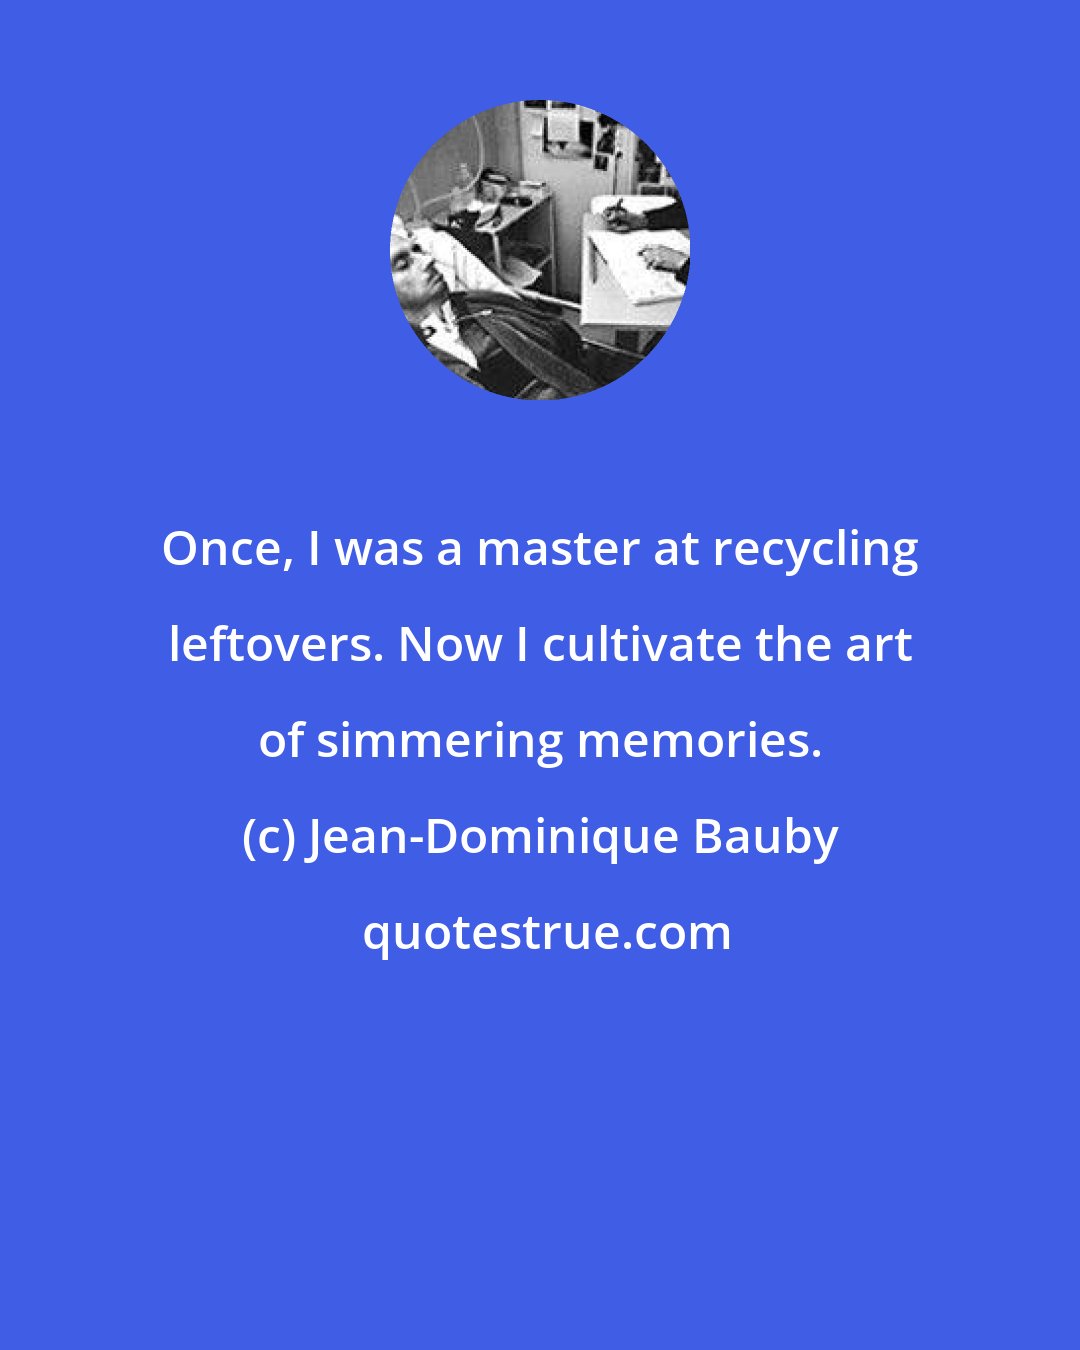 Jean-Dominique Bauby: Once, I was a master at recycling leftovers. Now I cultivate the art of simmering memories.